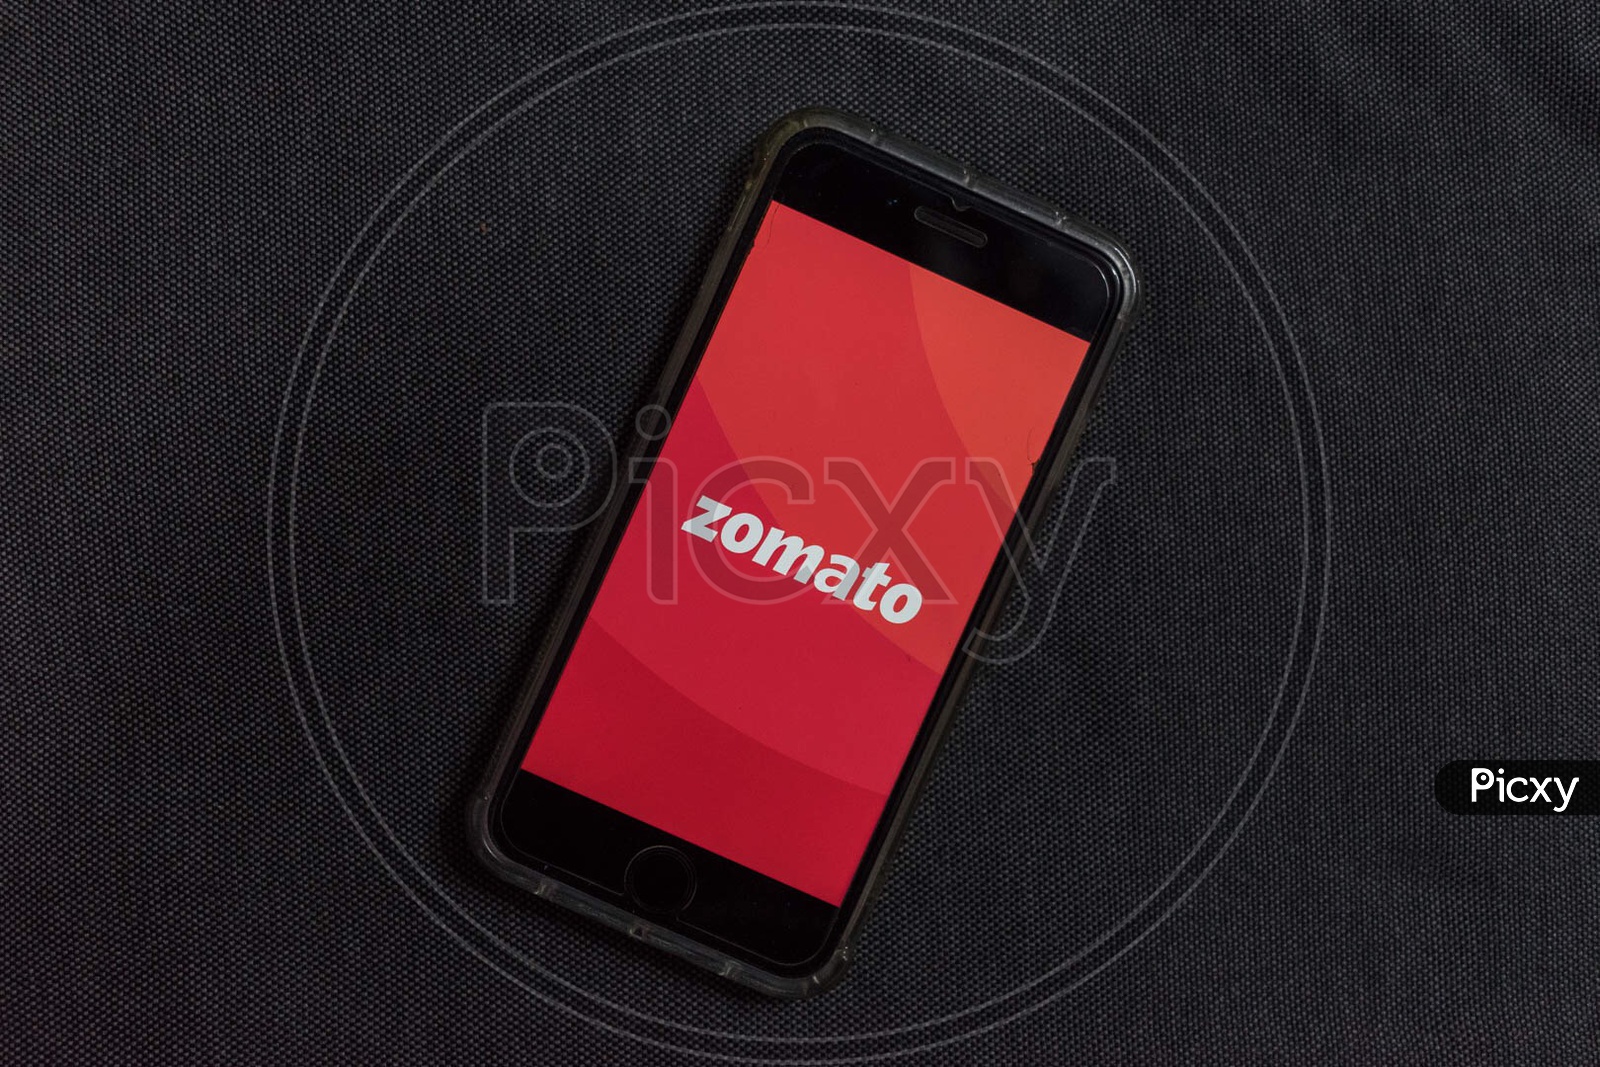 Zomato online food delivery app for mobile phones